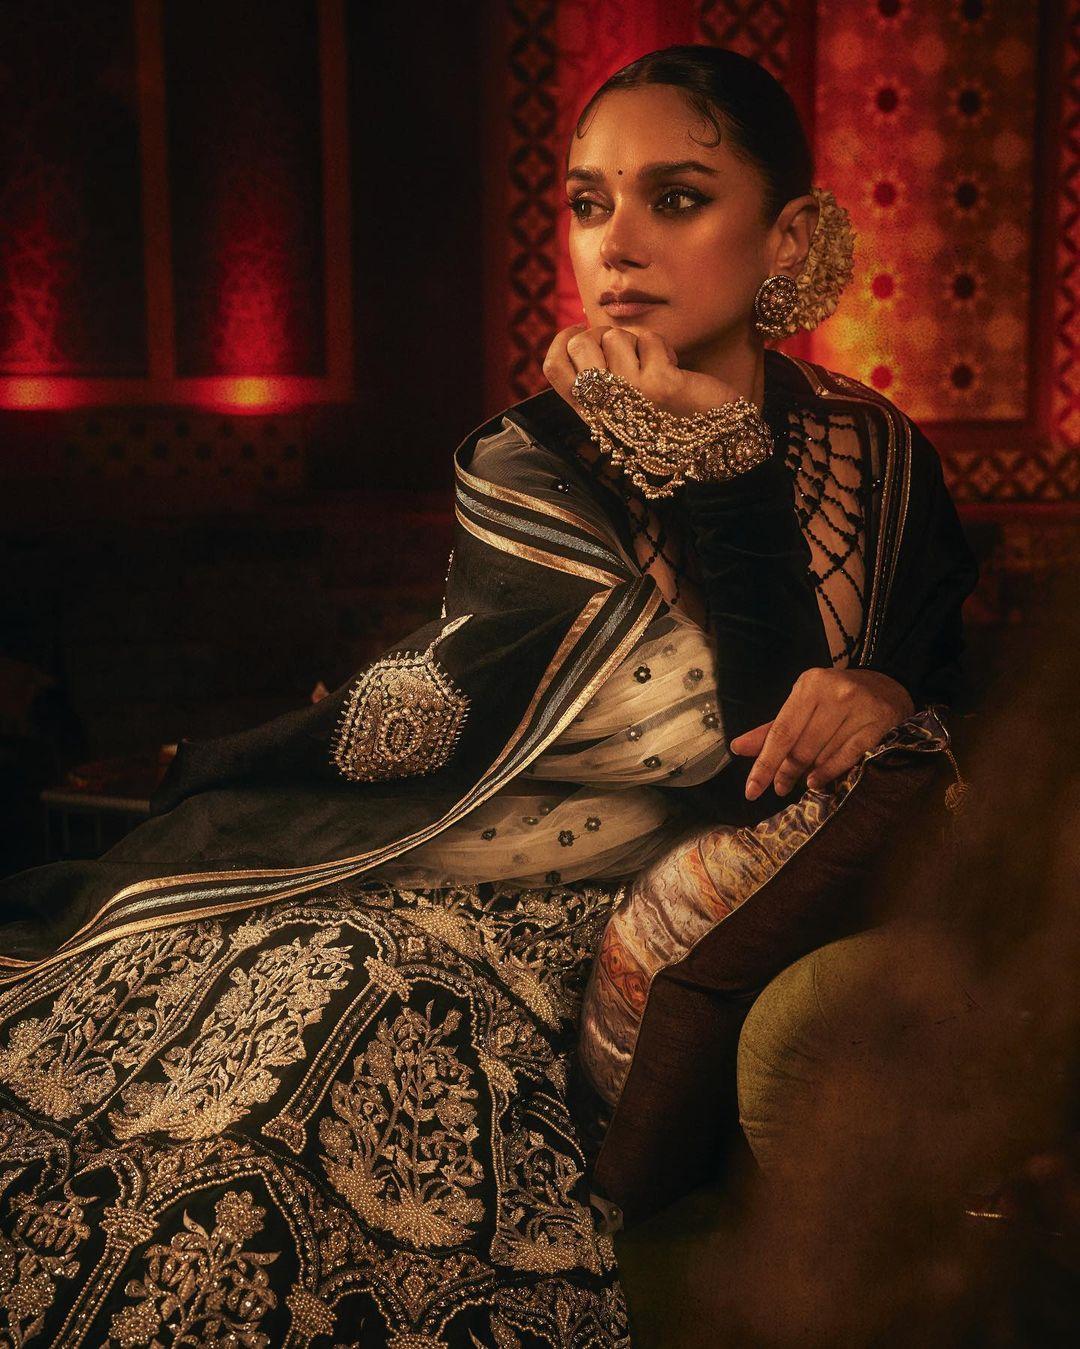 Aditi Rao Hydari was dressed in a lehenga set with a black modern-style top and a dupatta. She looked stunning in the black, white, and silver combo.